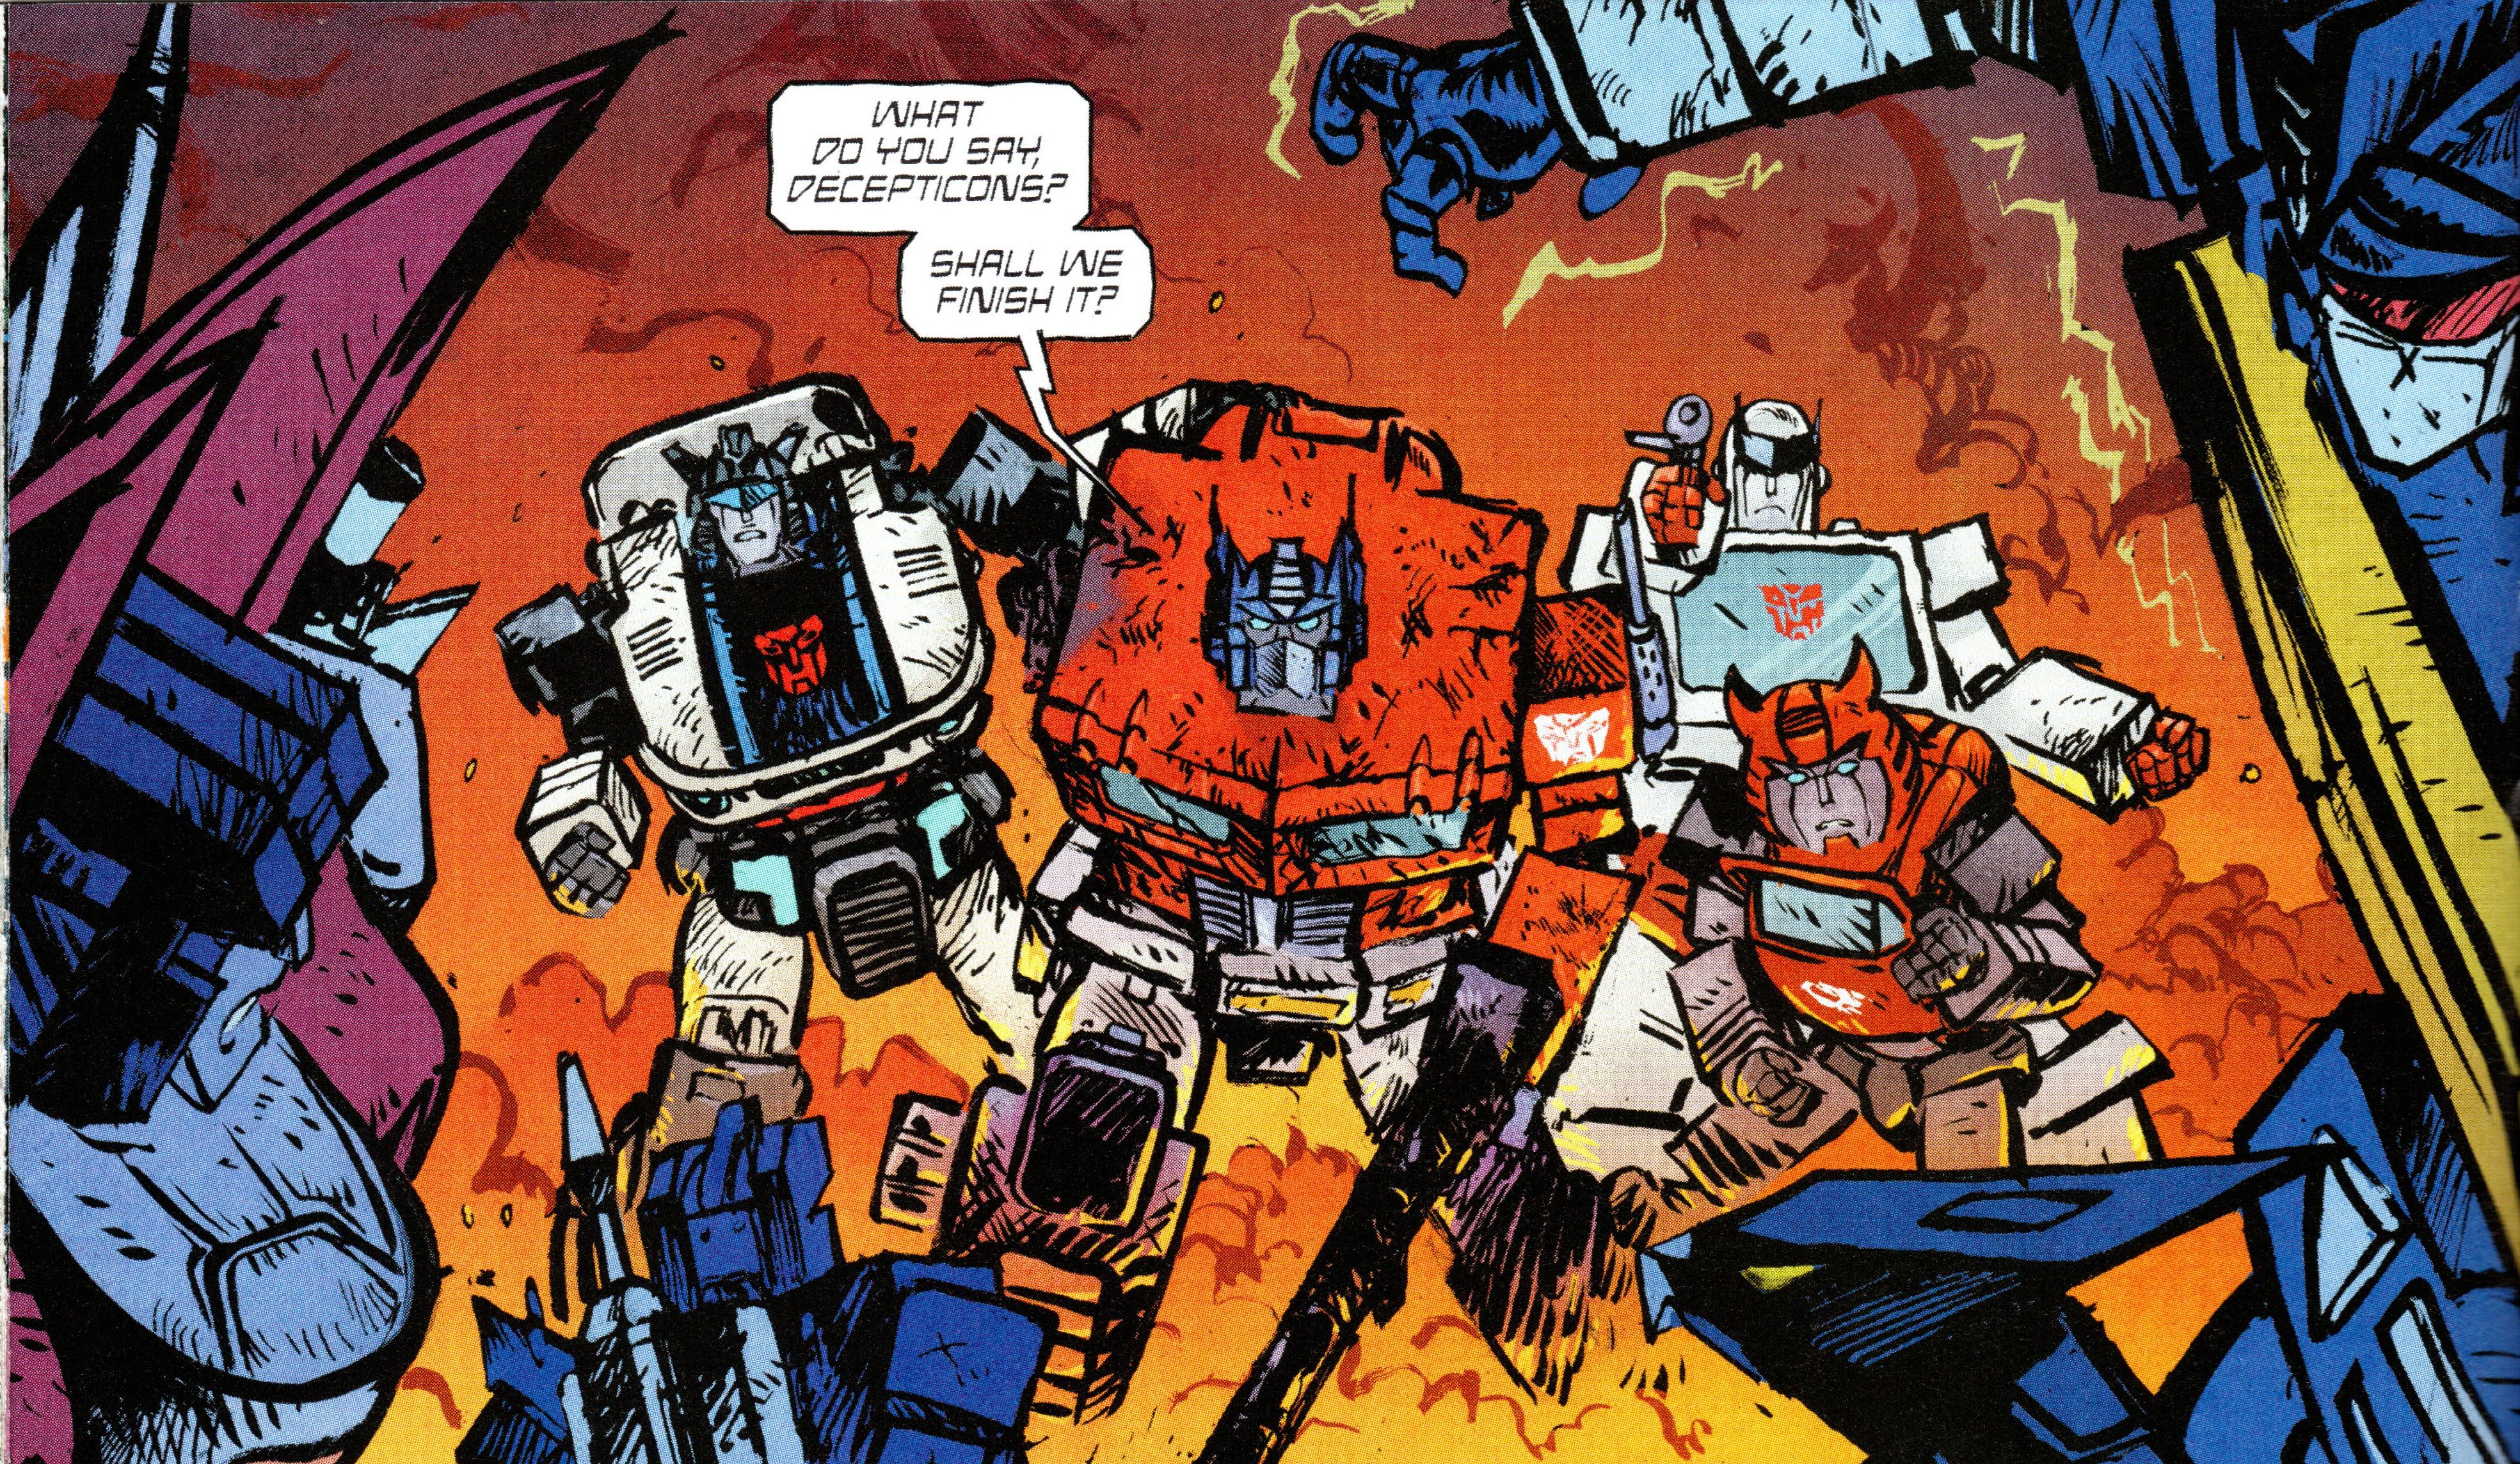 Transformers #4 Autobots Jazz, Optimus Prime, Ratcher and Cliffjumper are ready for battle